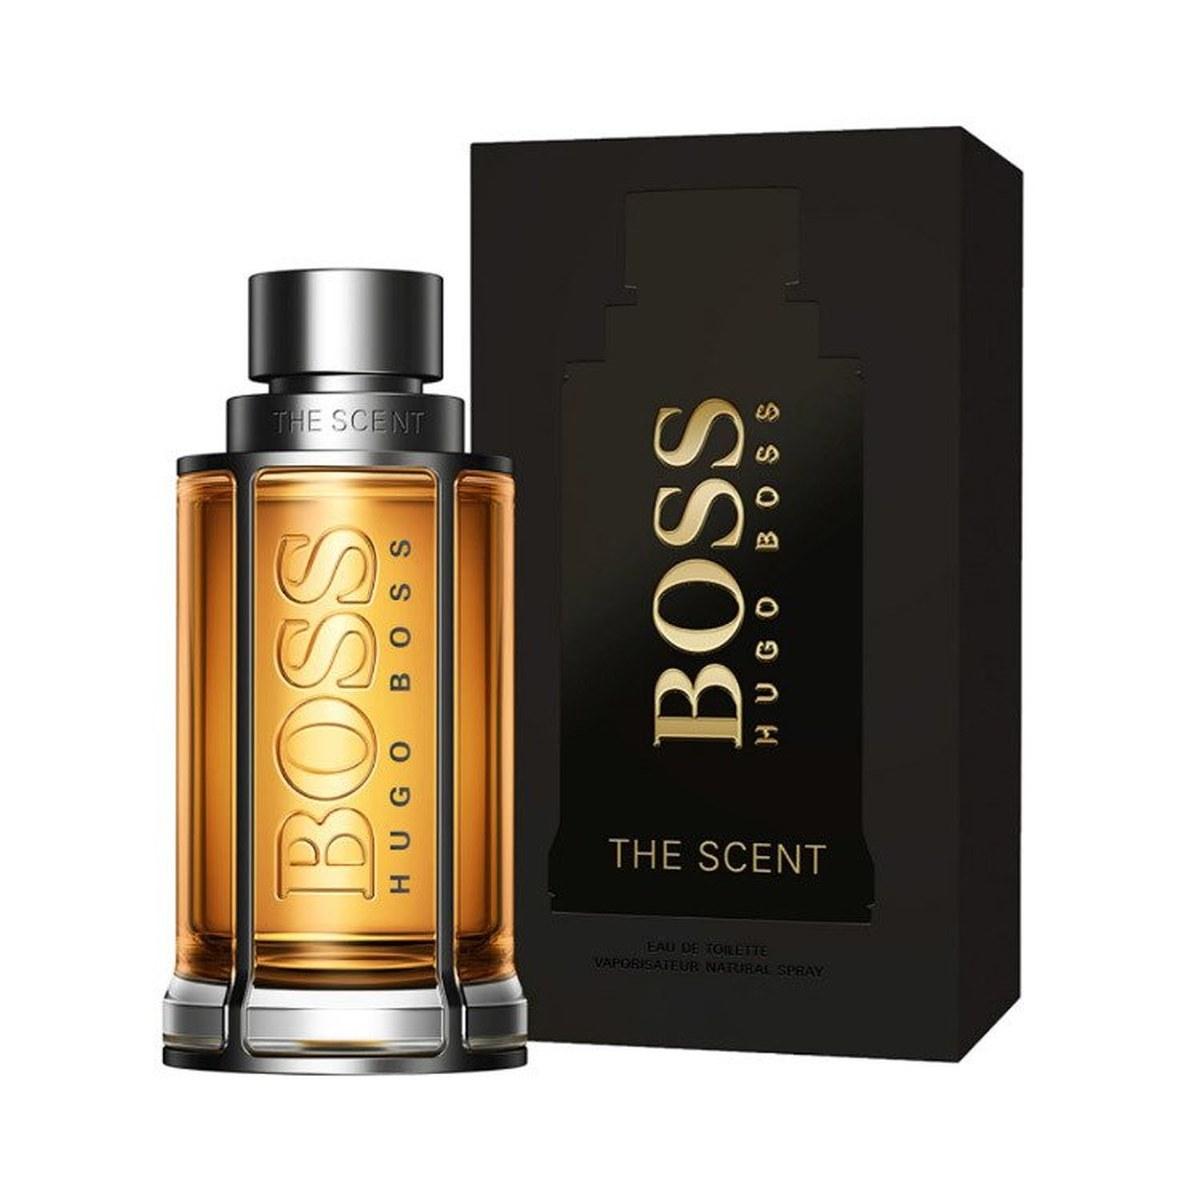 The scent 100 ml